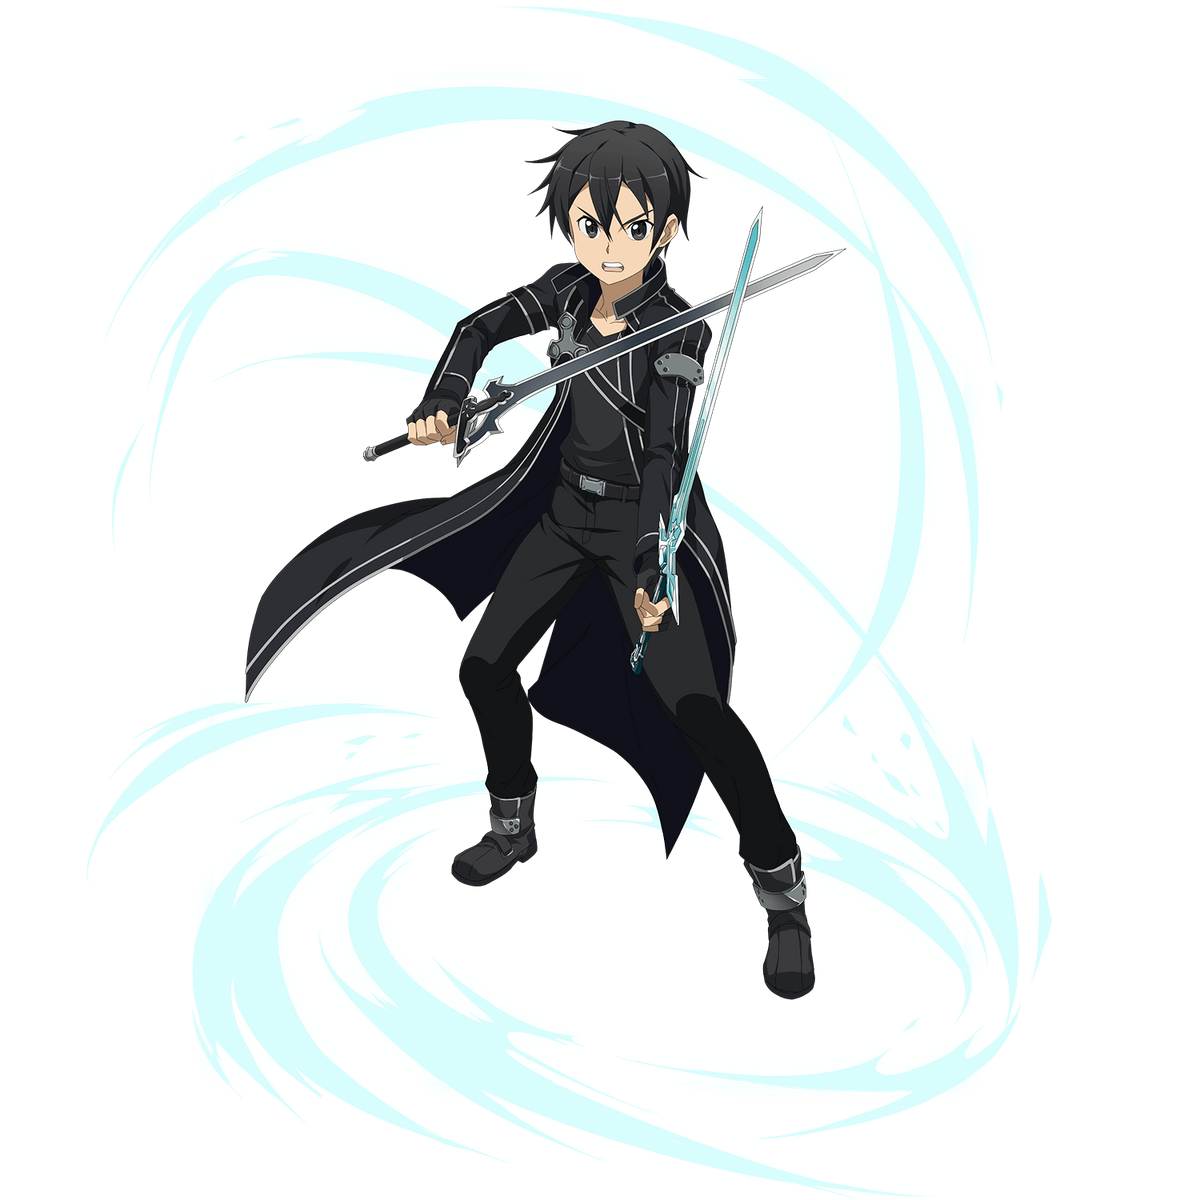 Party with Kirito and Asuna in Collaboration with Sword Art Online   PSUBlog